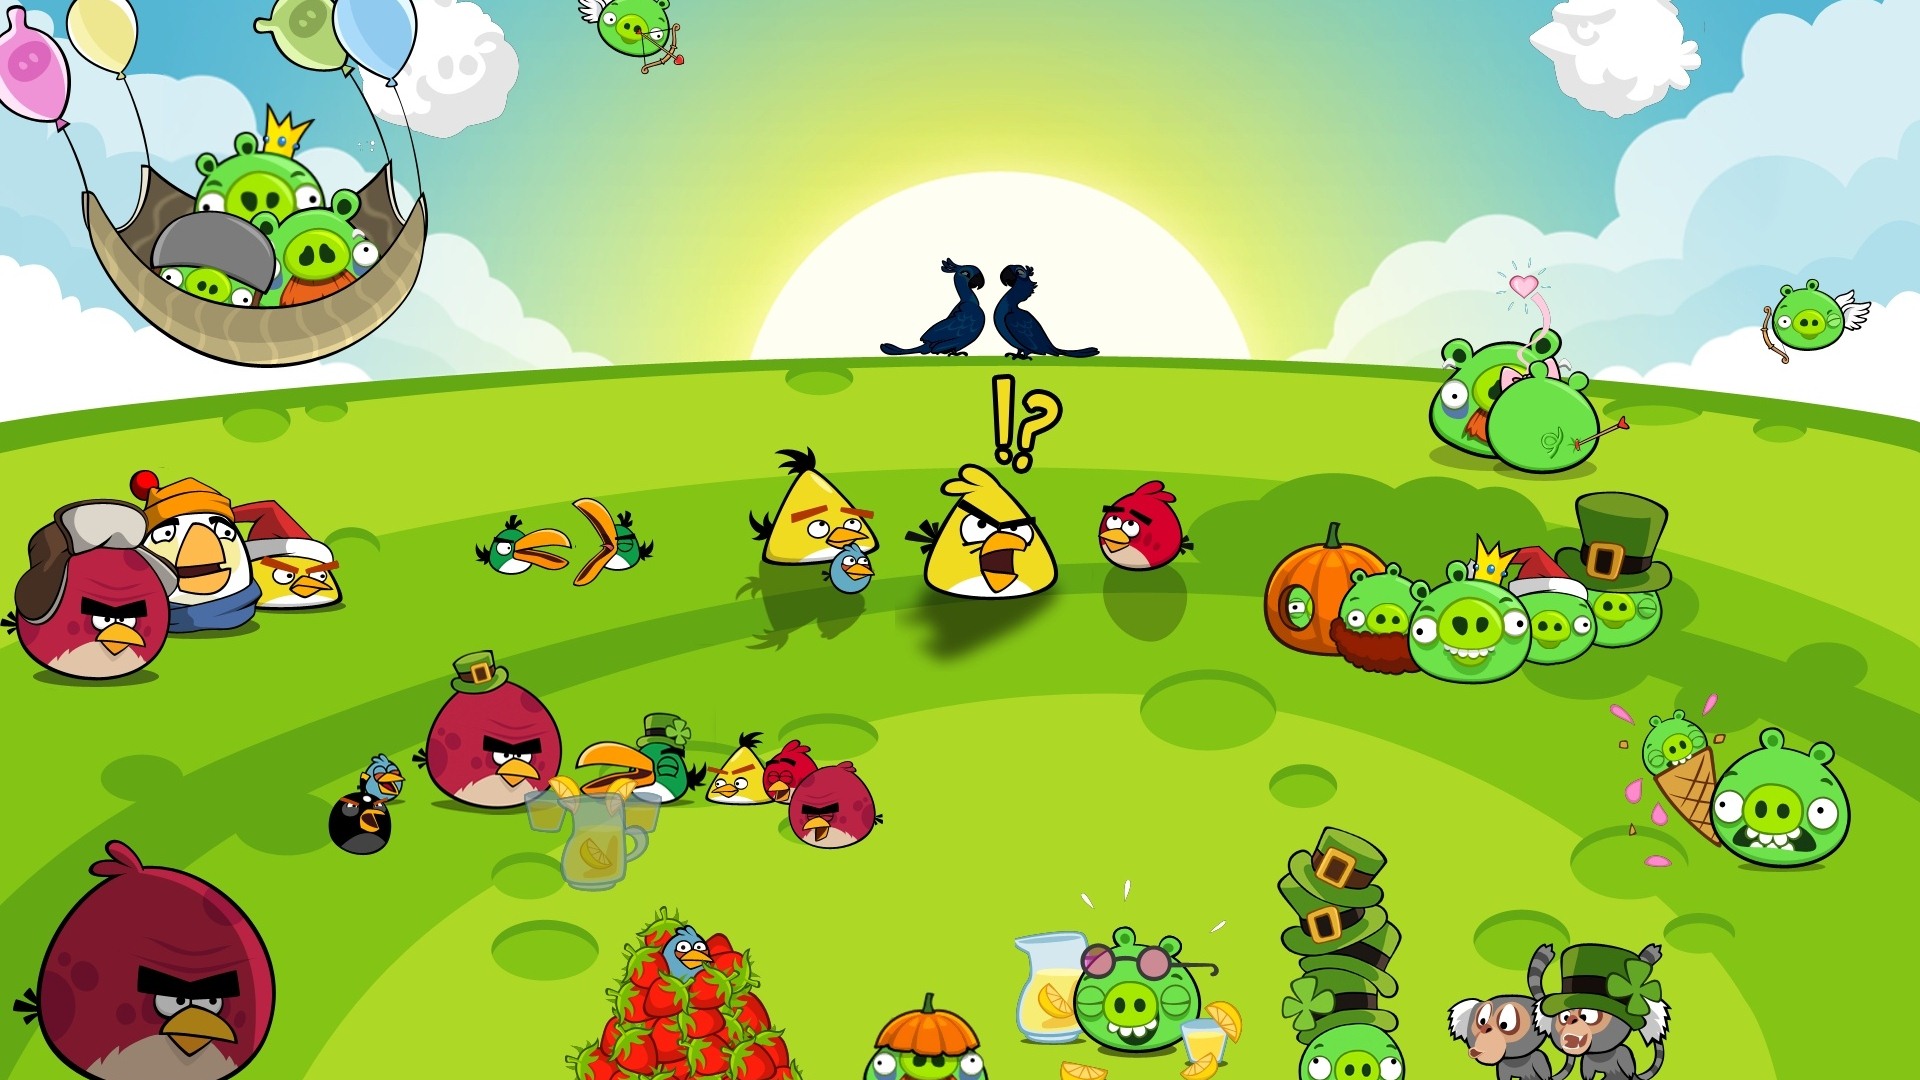 Angry Birds Game Wallpapers #11 - 1920x1080